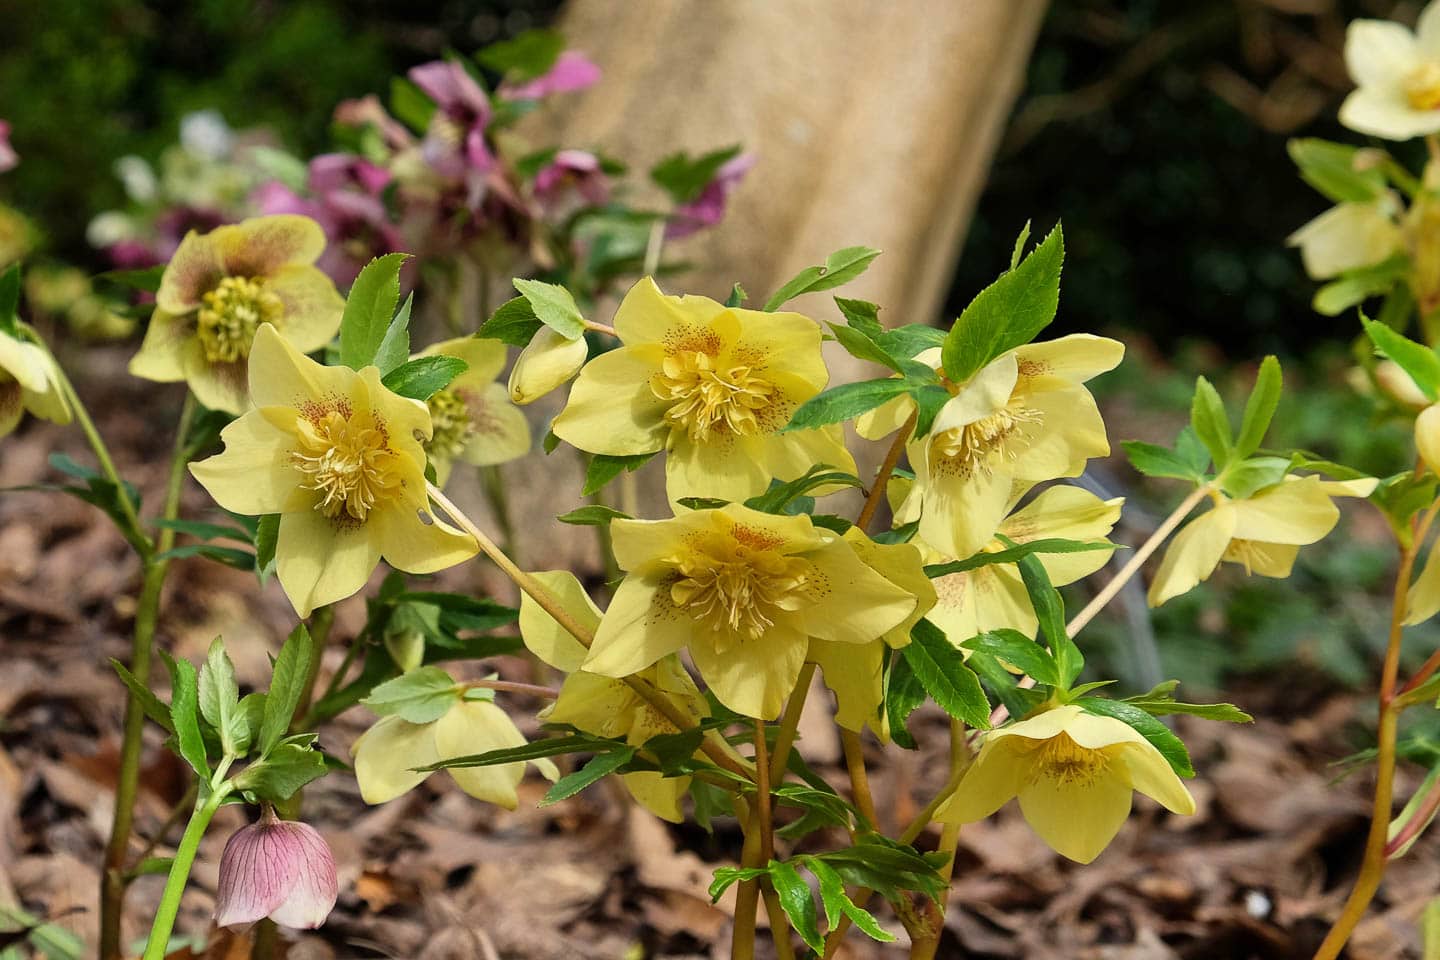 speckled yellow Hellebore flowers